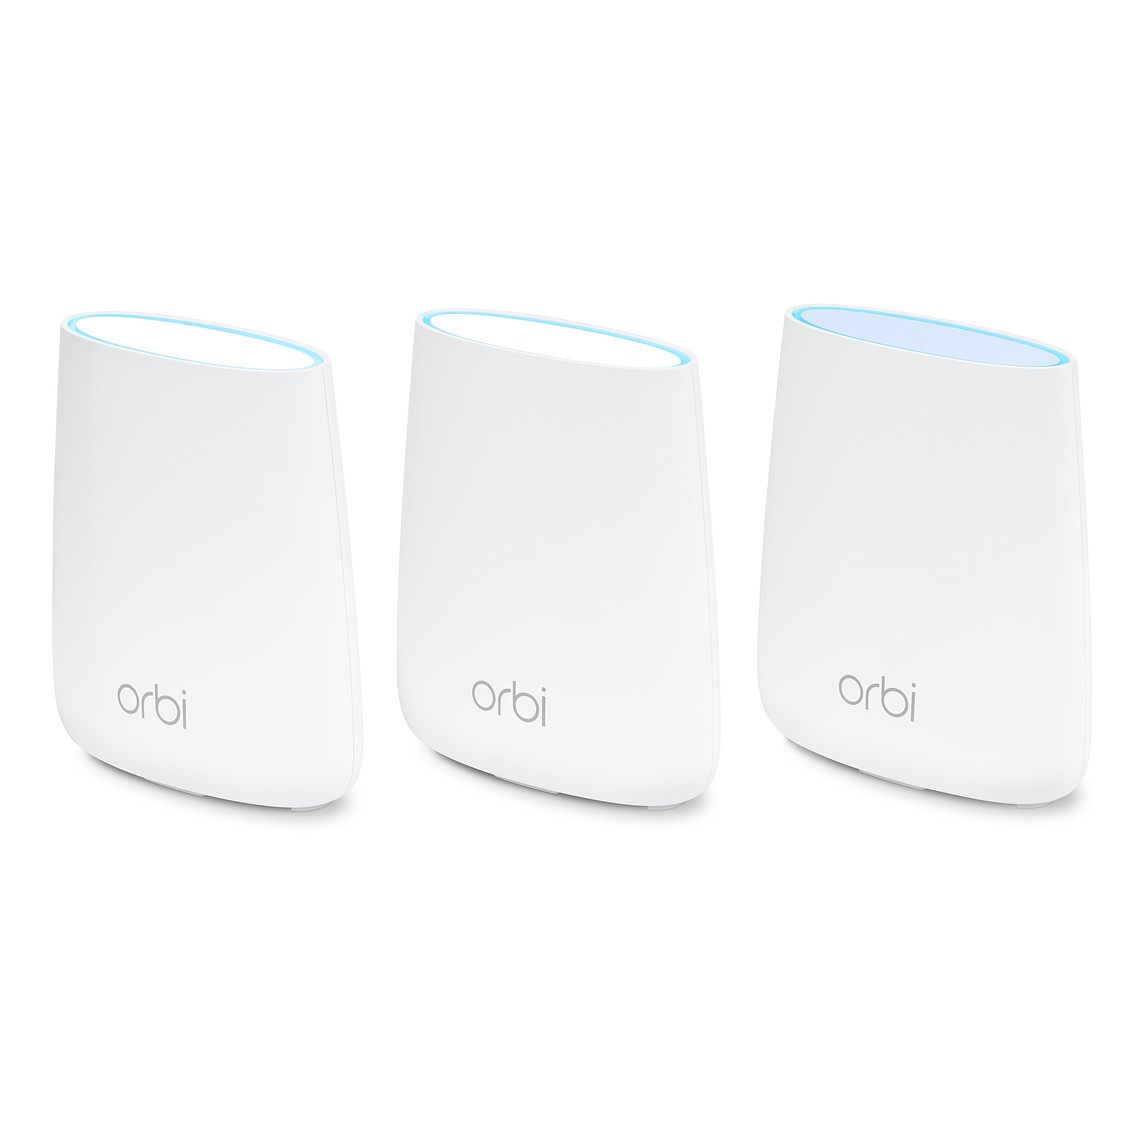 Netgear Orbi RBK50 is one of three high-end Wi-fi mesh systems tested.